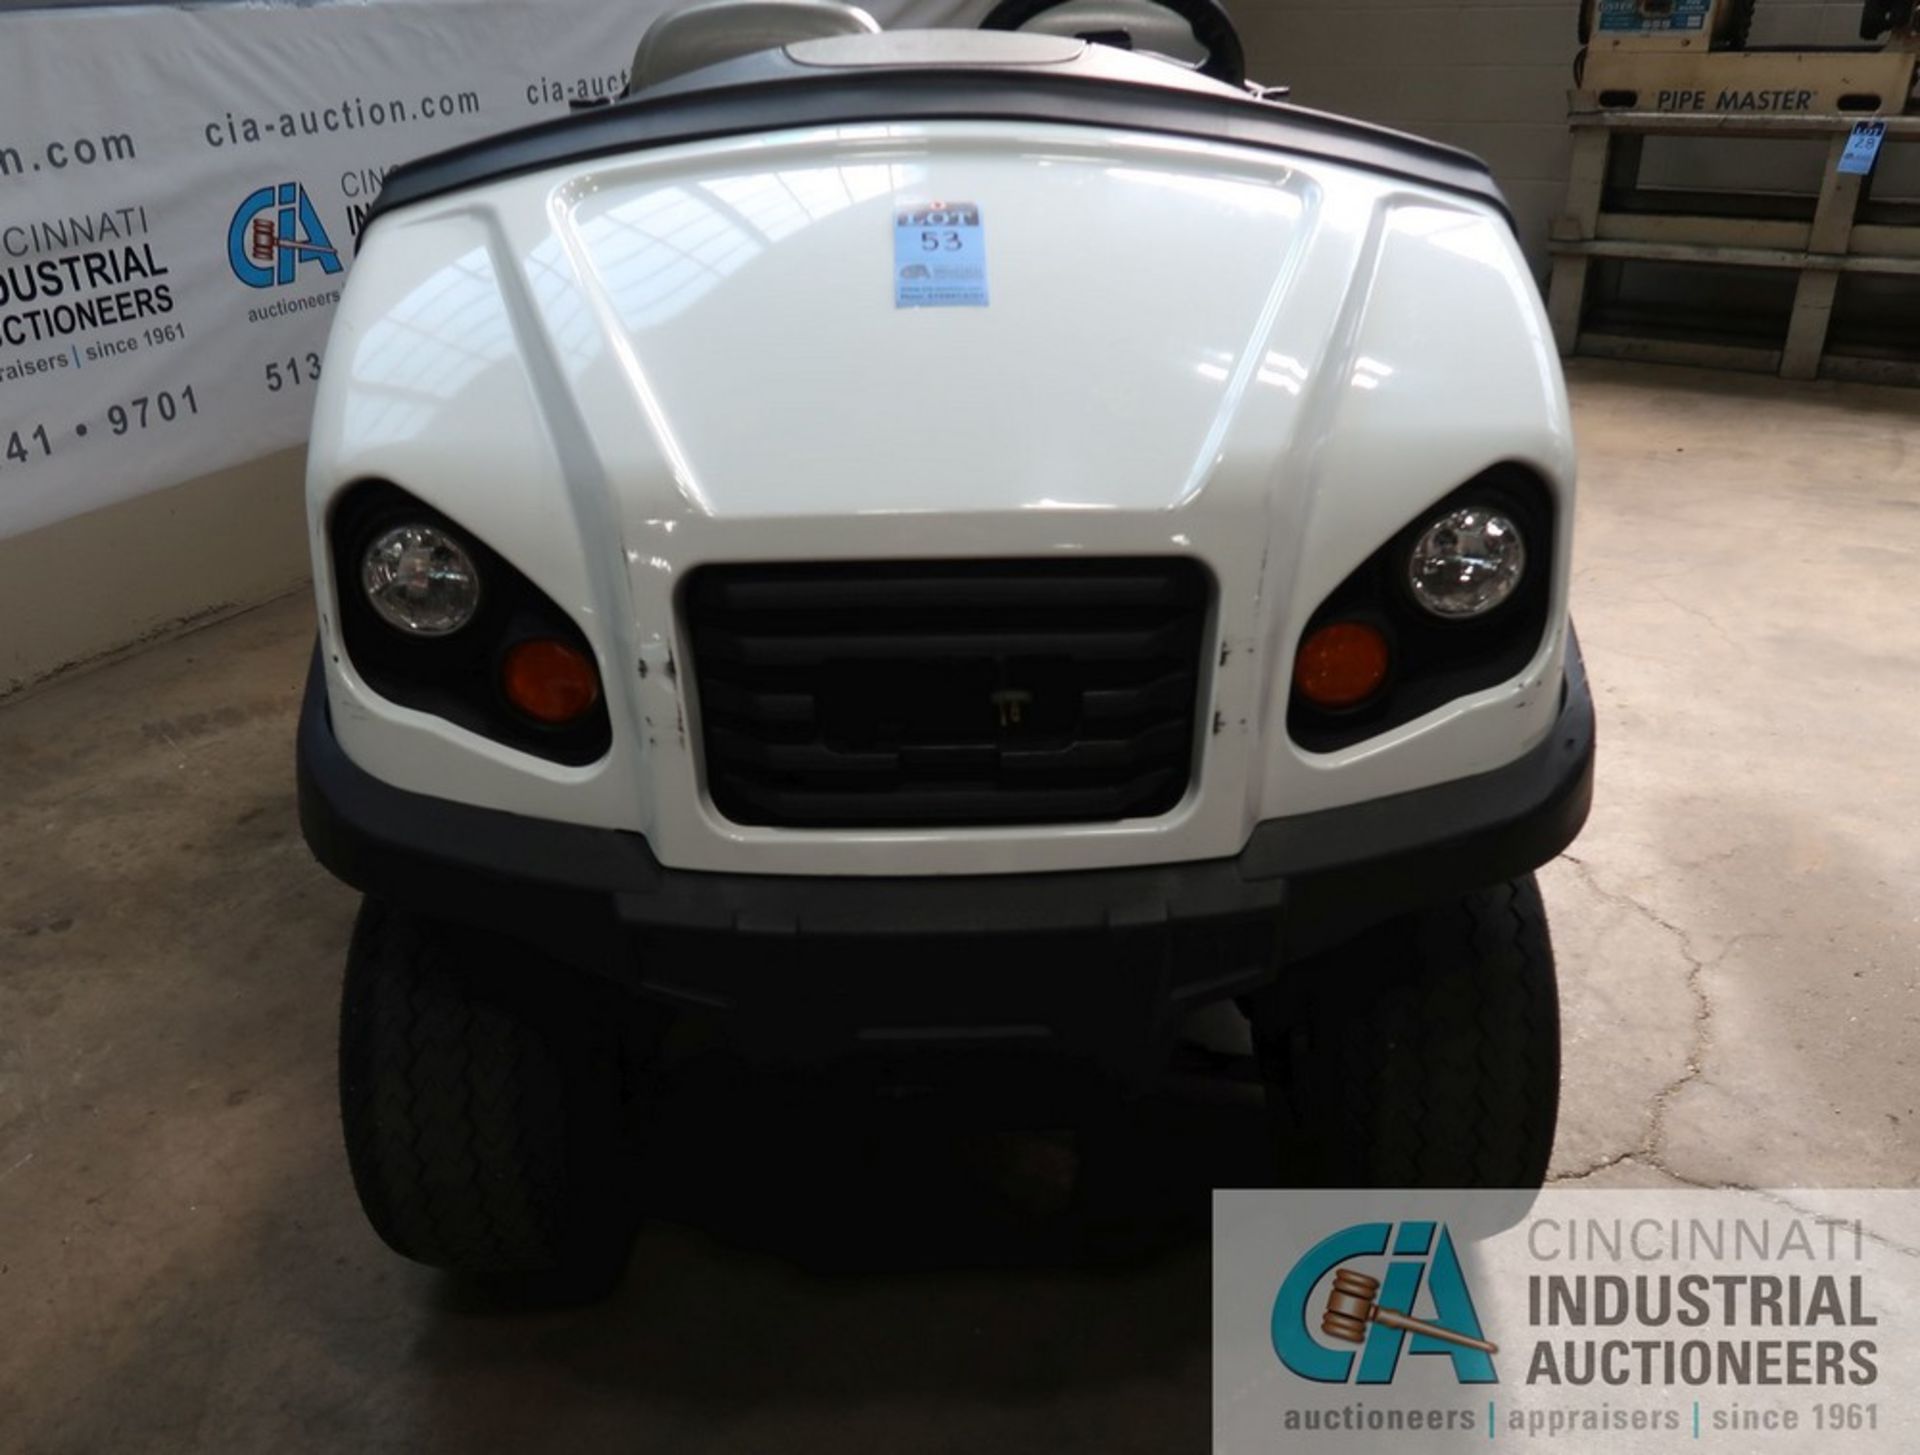 2015 CLUB CAR MODEL CARRYALL 550 ELECTRIC GOLF CART- Needs new batteries - does not run; S/N MM1535 - Image 3 of 13